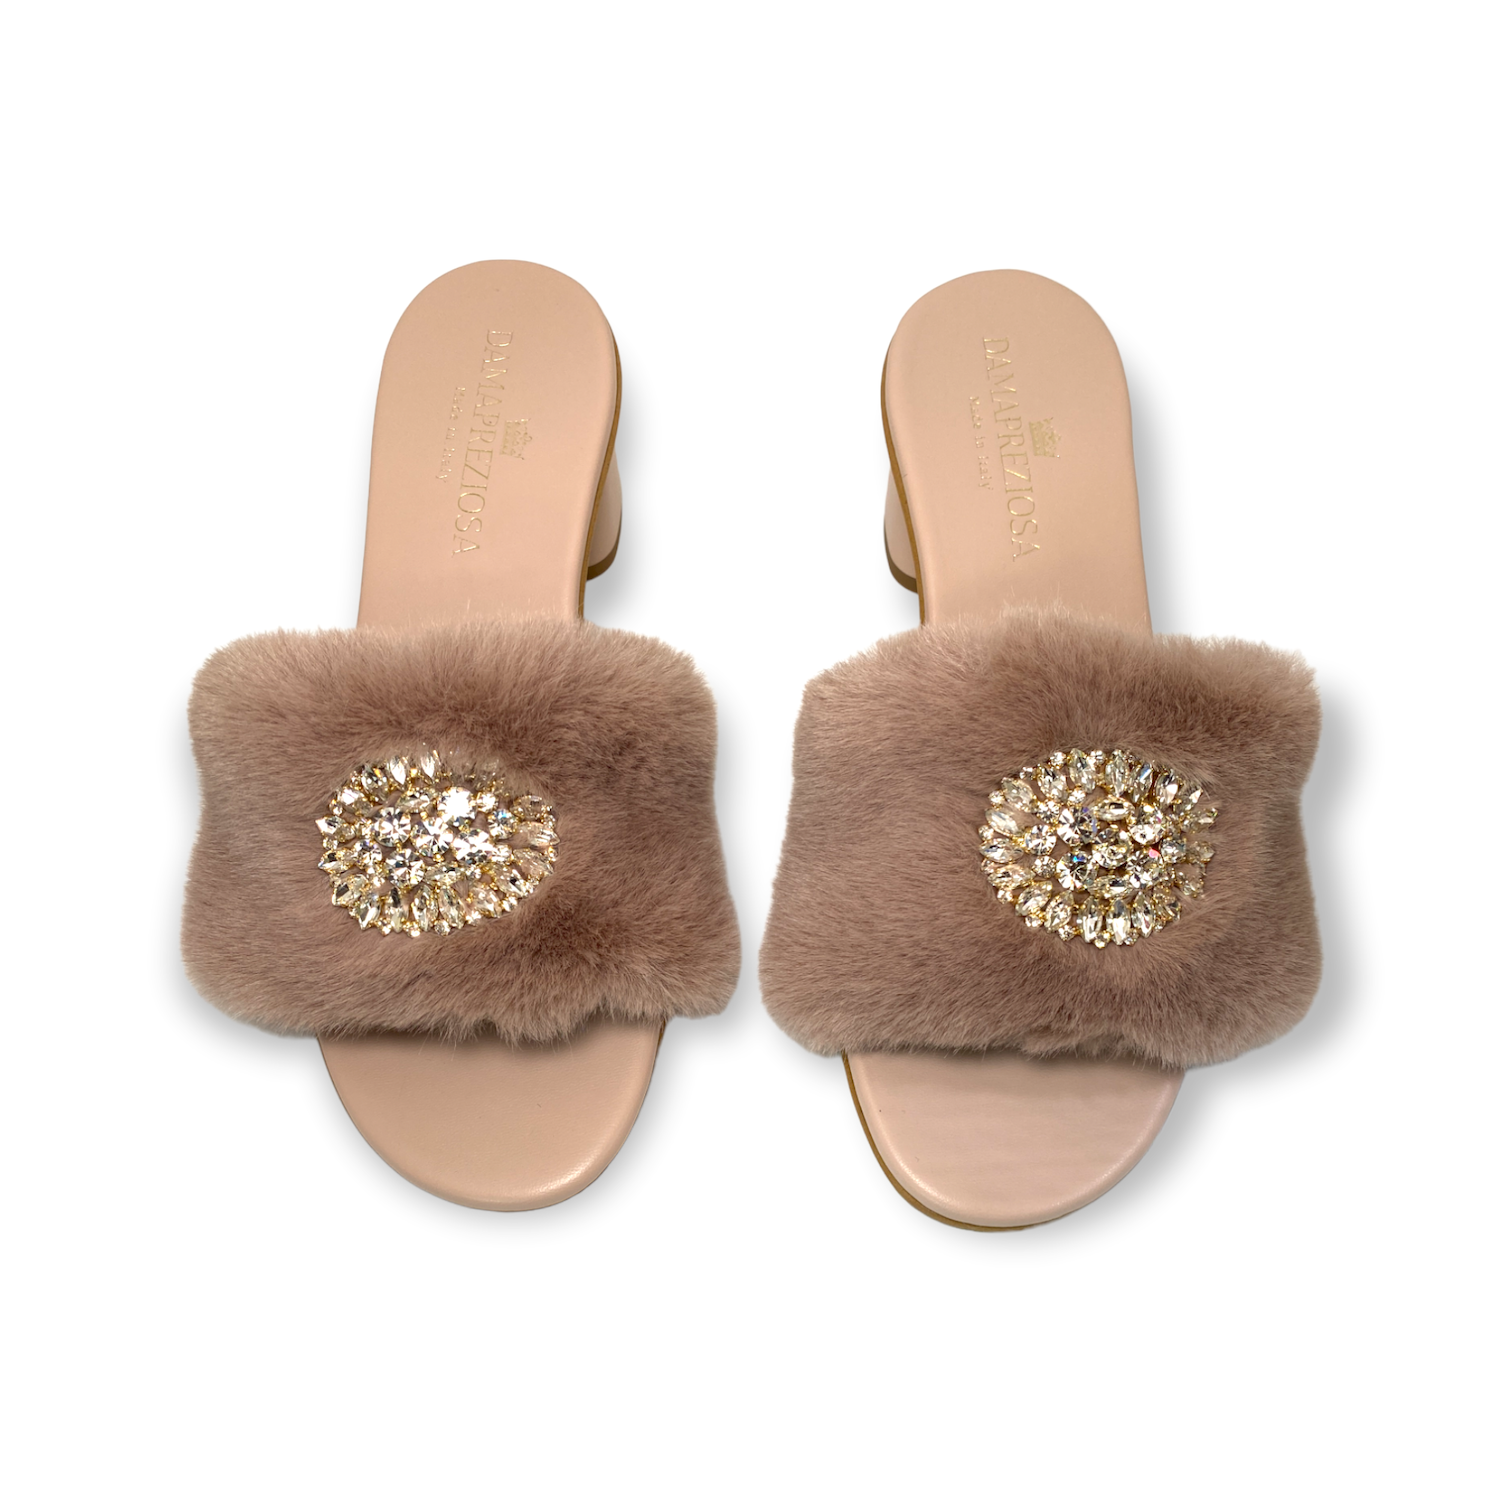 Victoria mule in nude pink faux fur with crystals